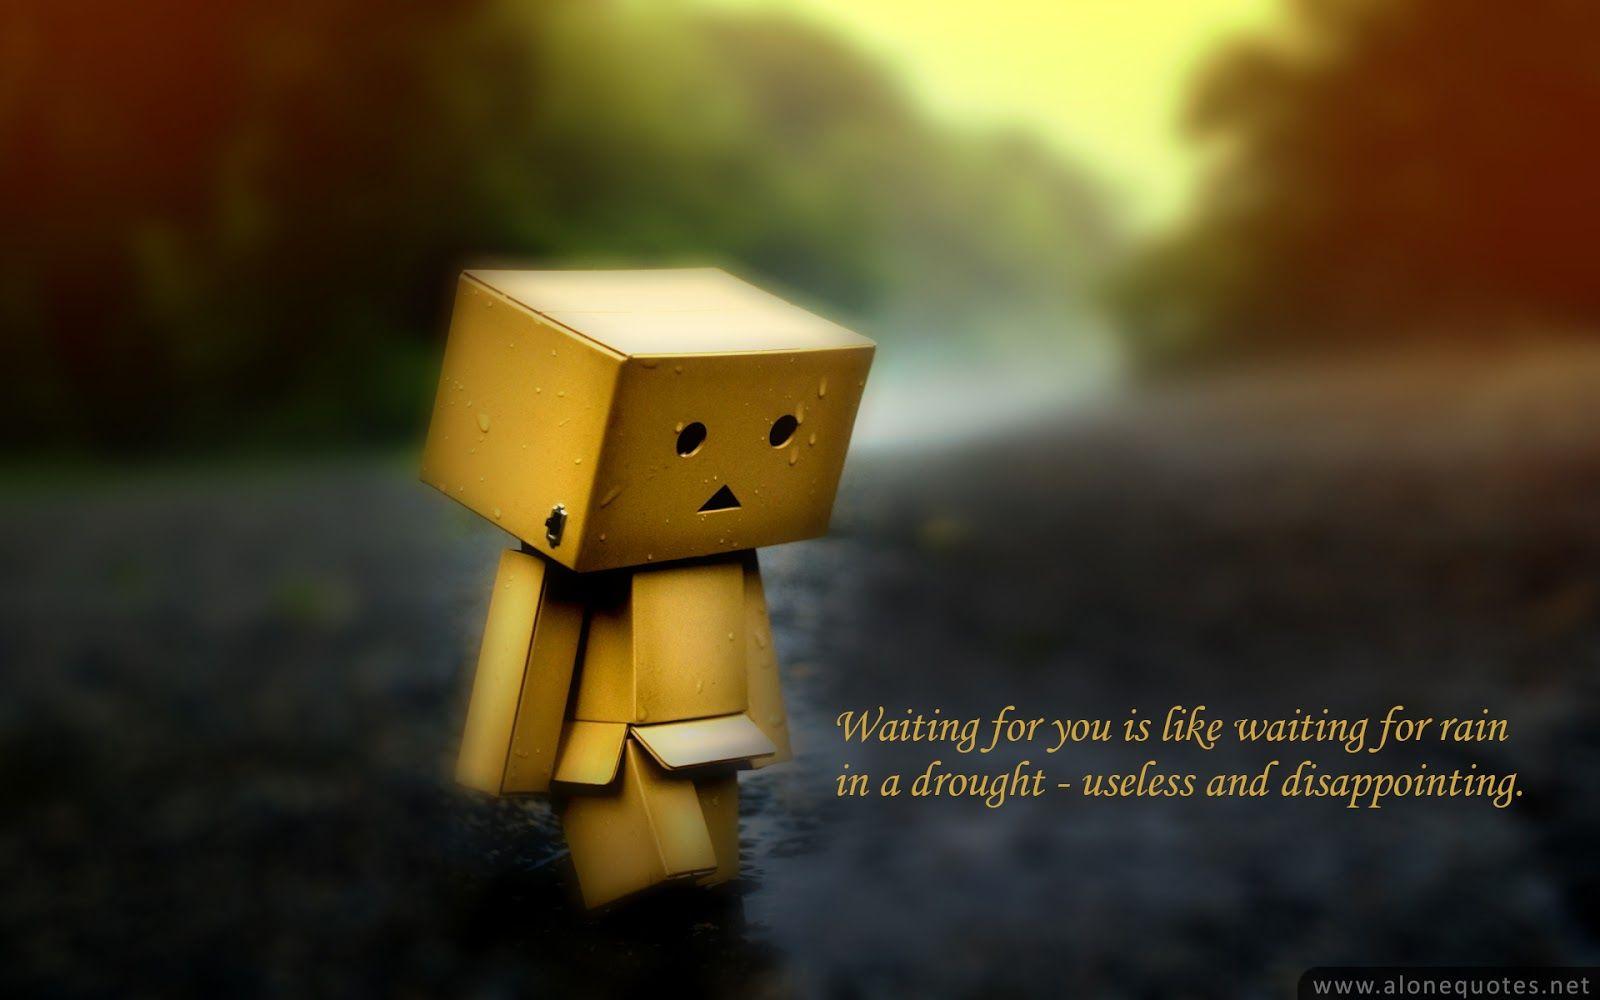 Sad And Lonely Box Quotes Wallpapers - Wallpaper Cave